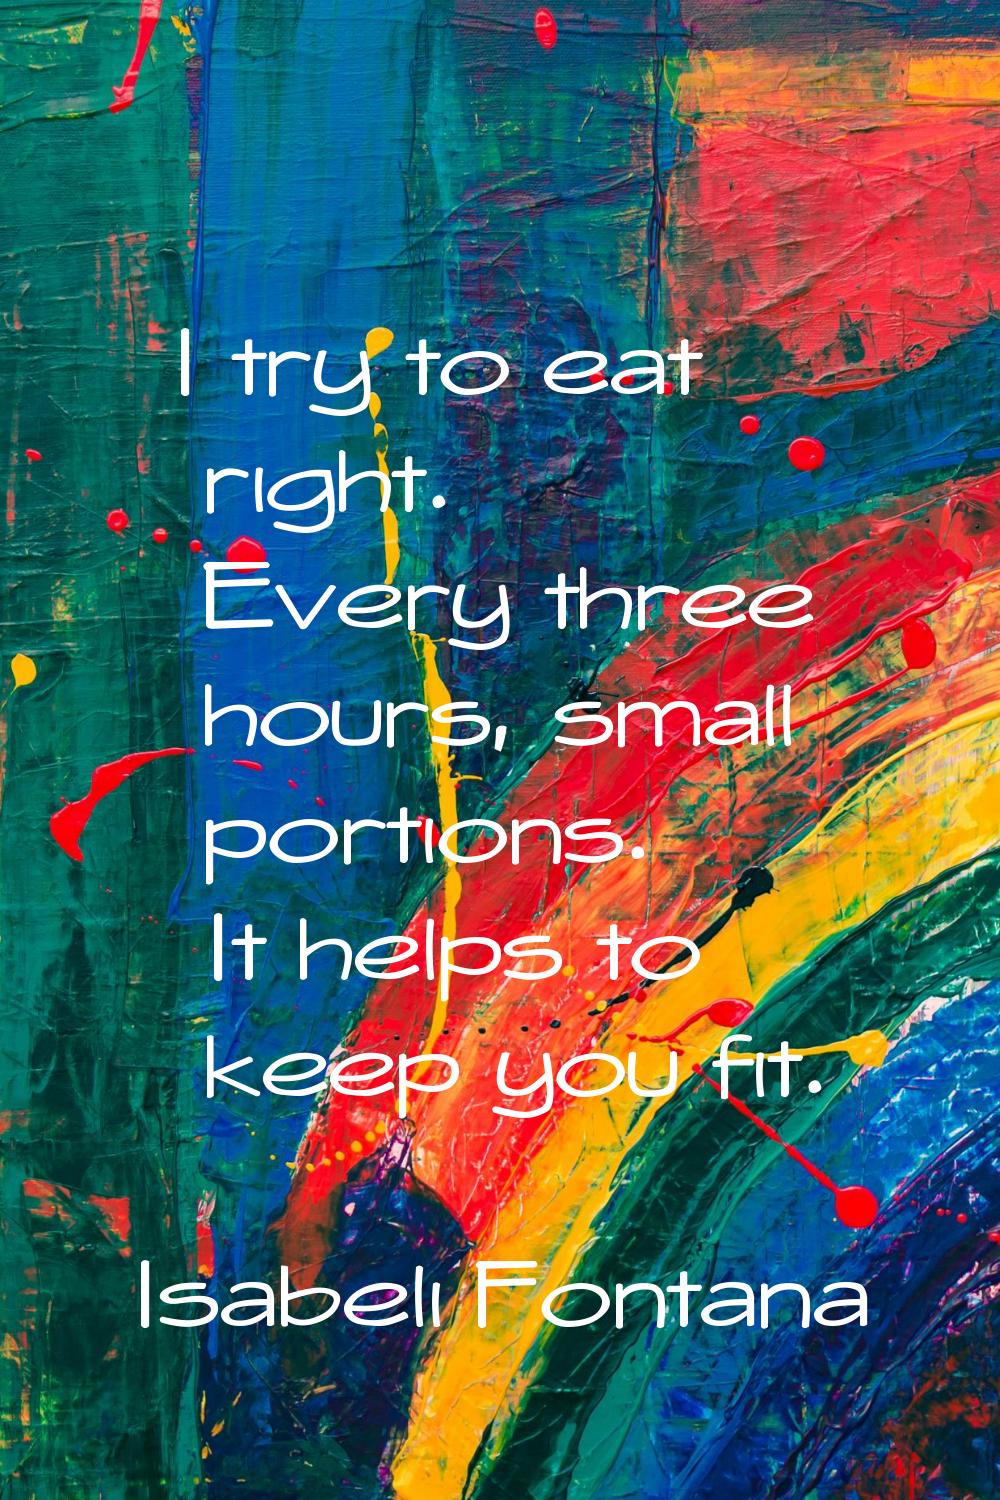 I try to eat right. Every three hours, small portions. It helps to keep you fit.